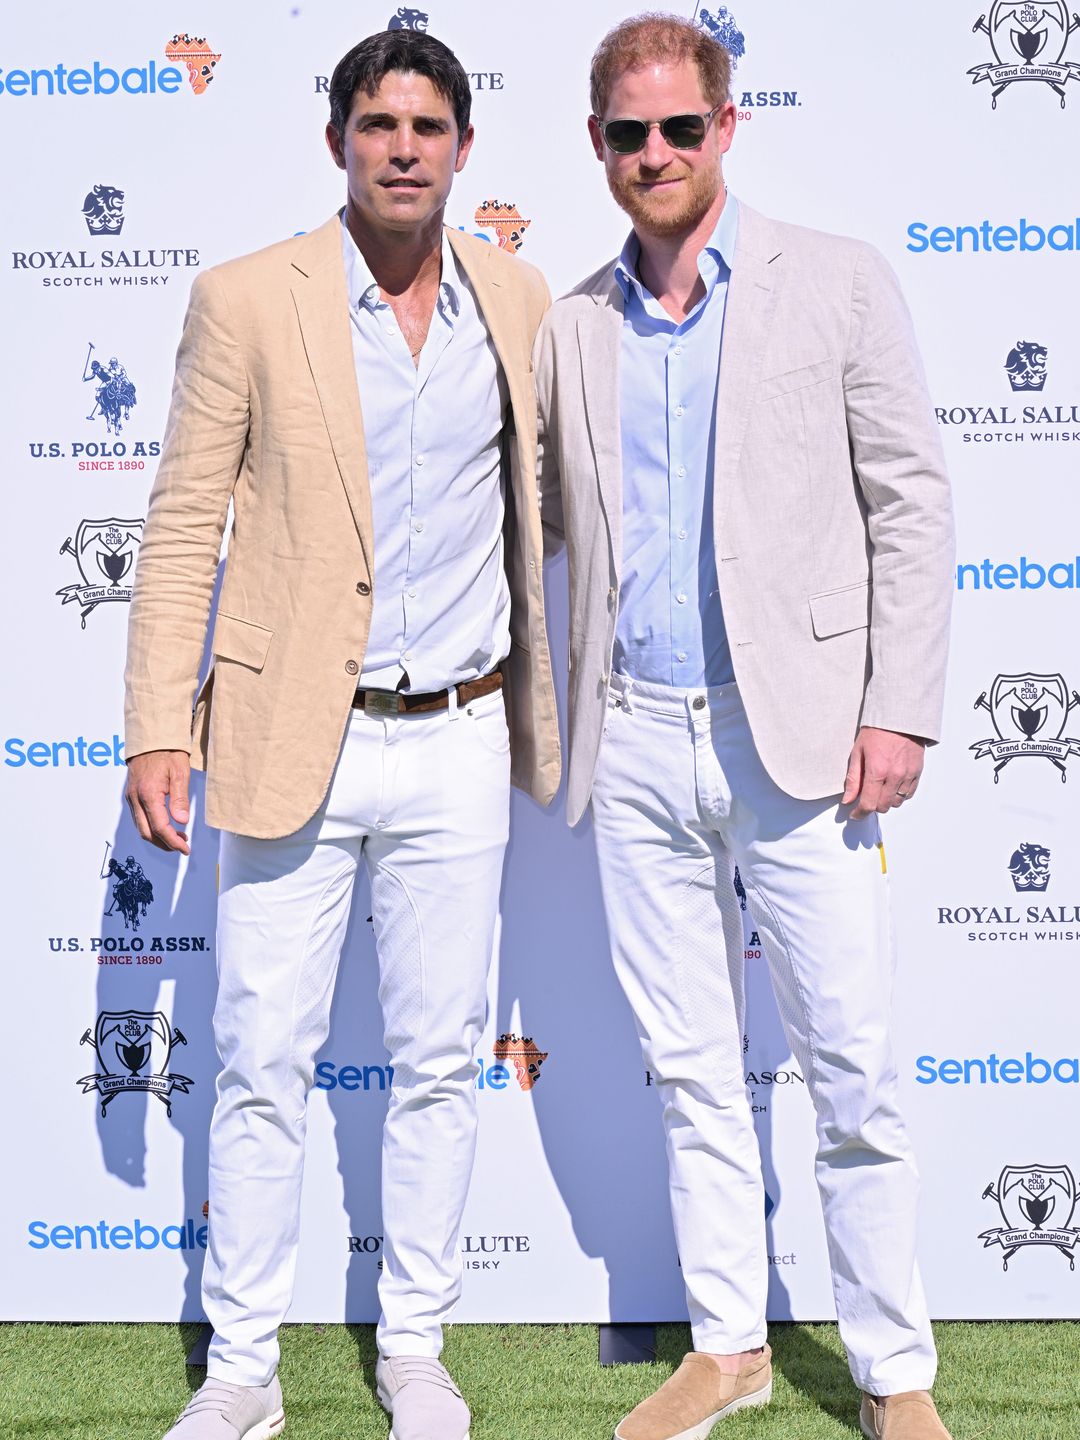 Nacho Figueras standing with Prince Harry